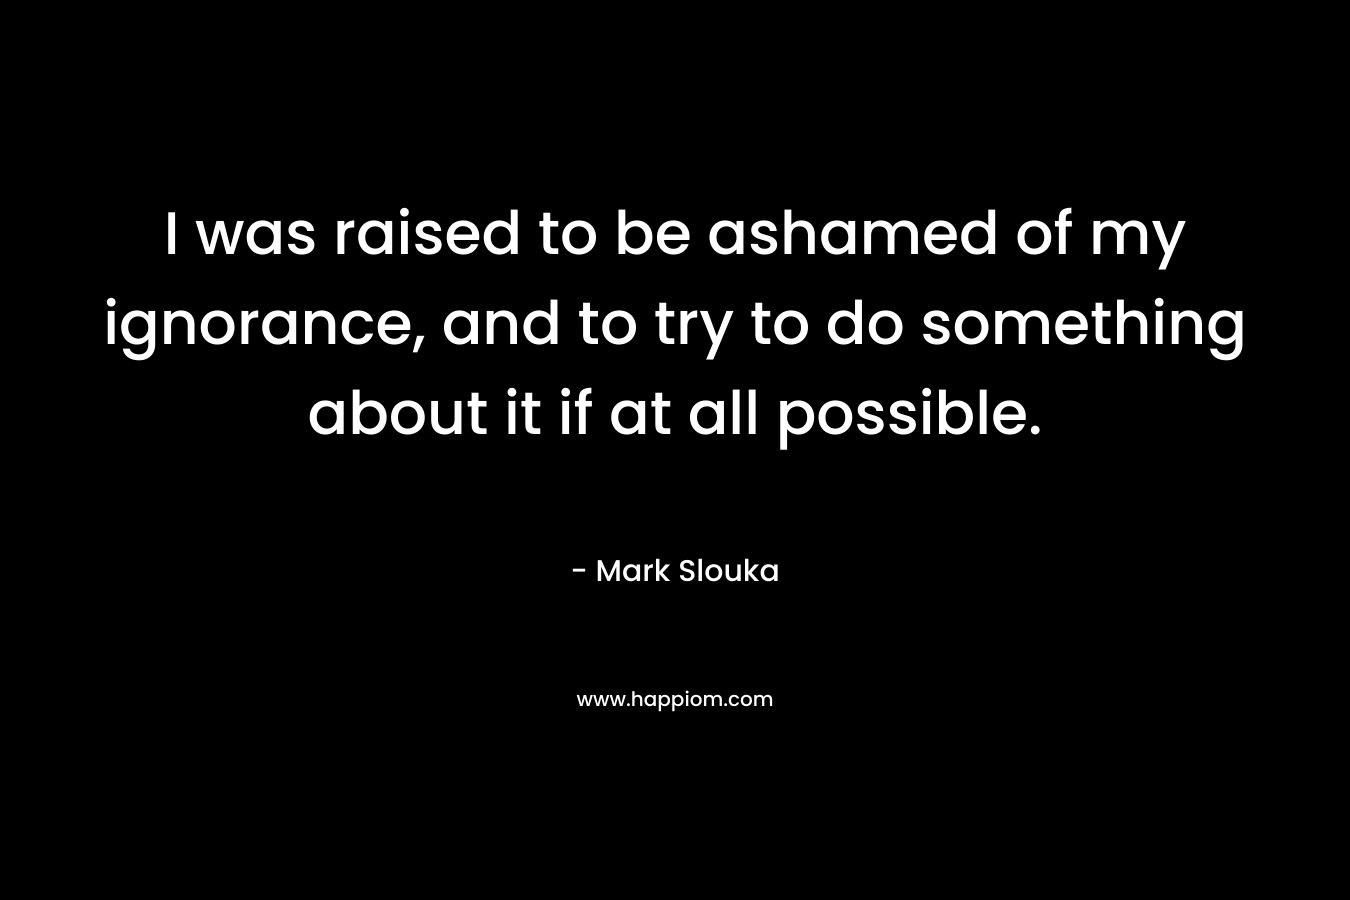 I was raised to be ashamed of my ignorance, and to try to do something about it if at all possible. – Mark Slouka